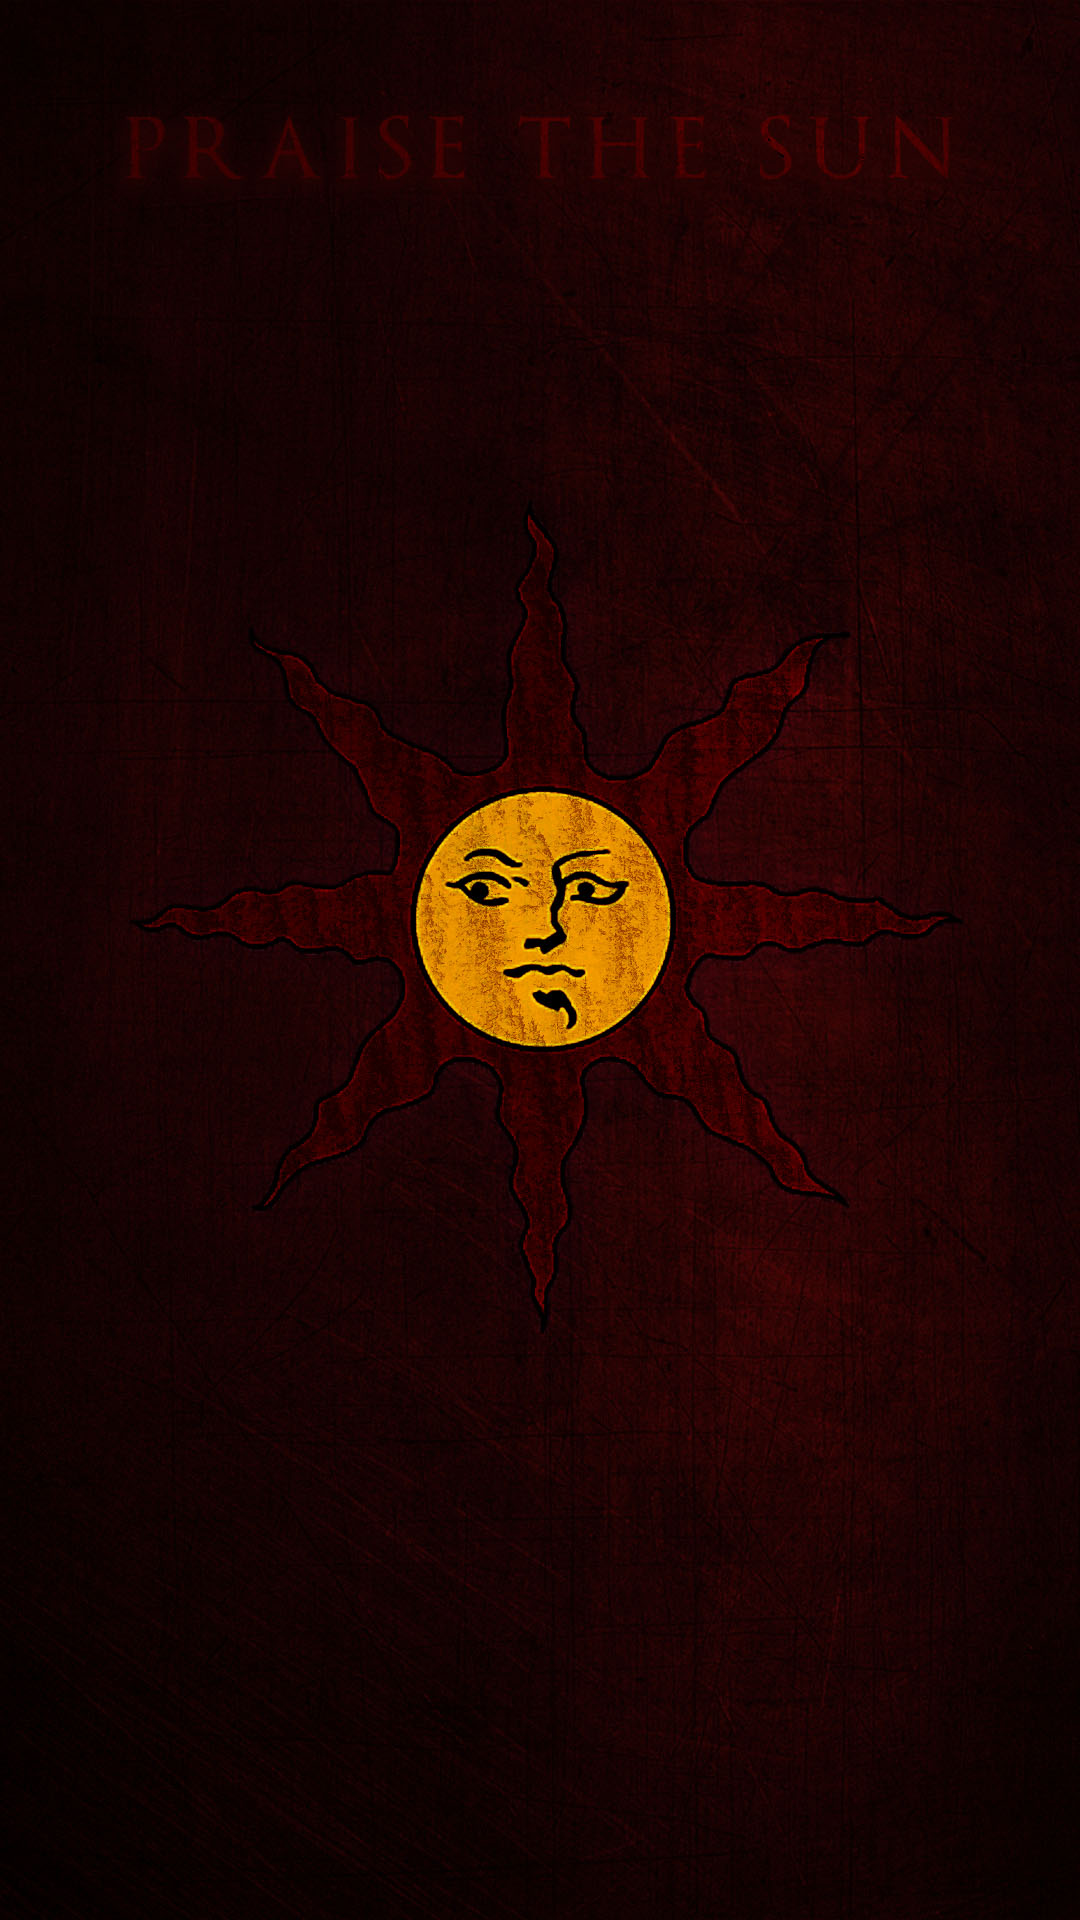 I have edited some phone wallpapers solaire praise the sun rdarksouls